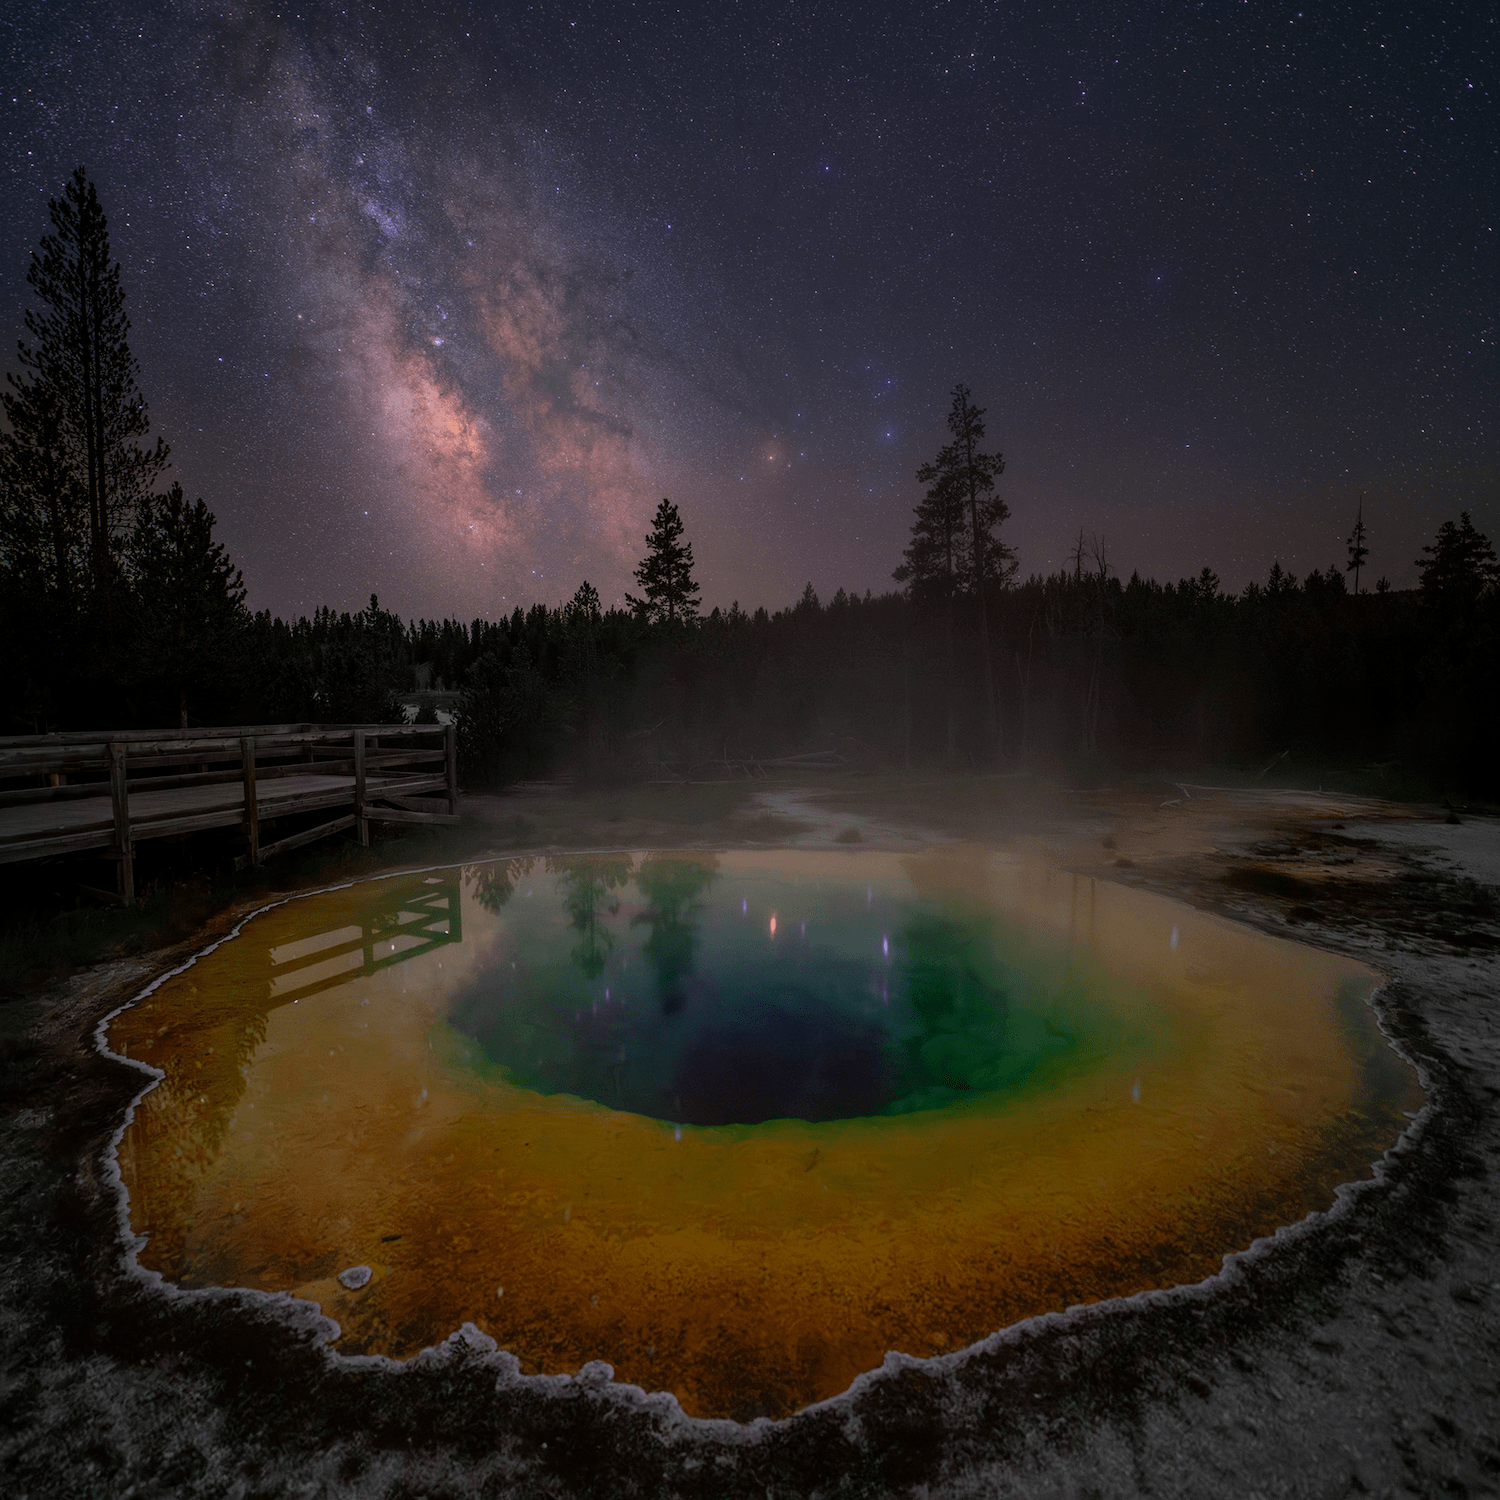 a geothermal pool in the foreground with the milky way above